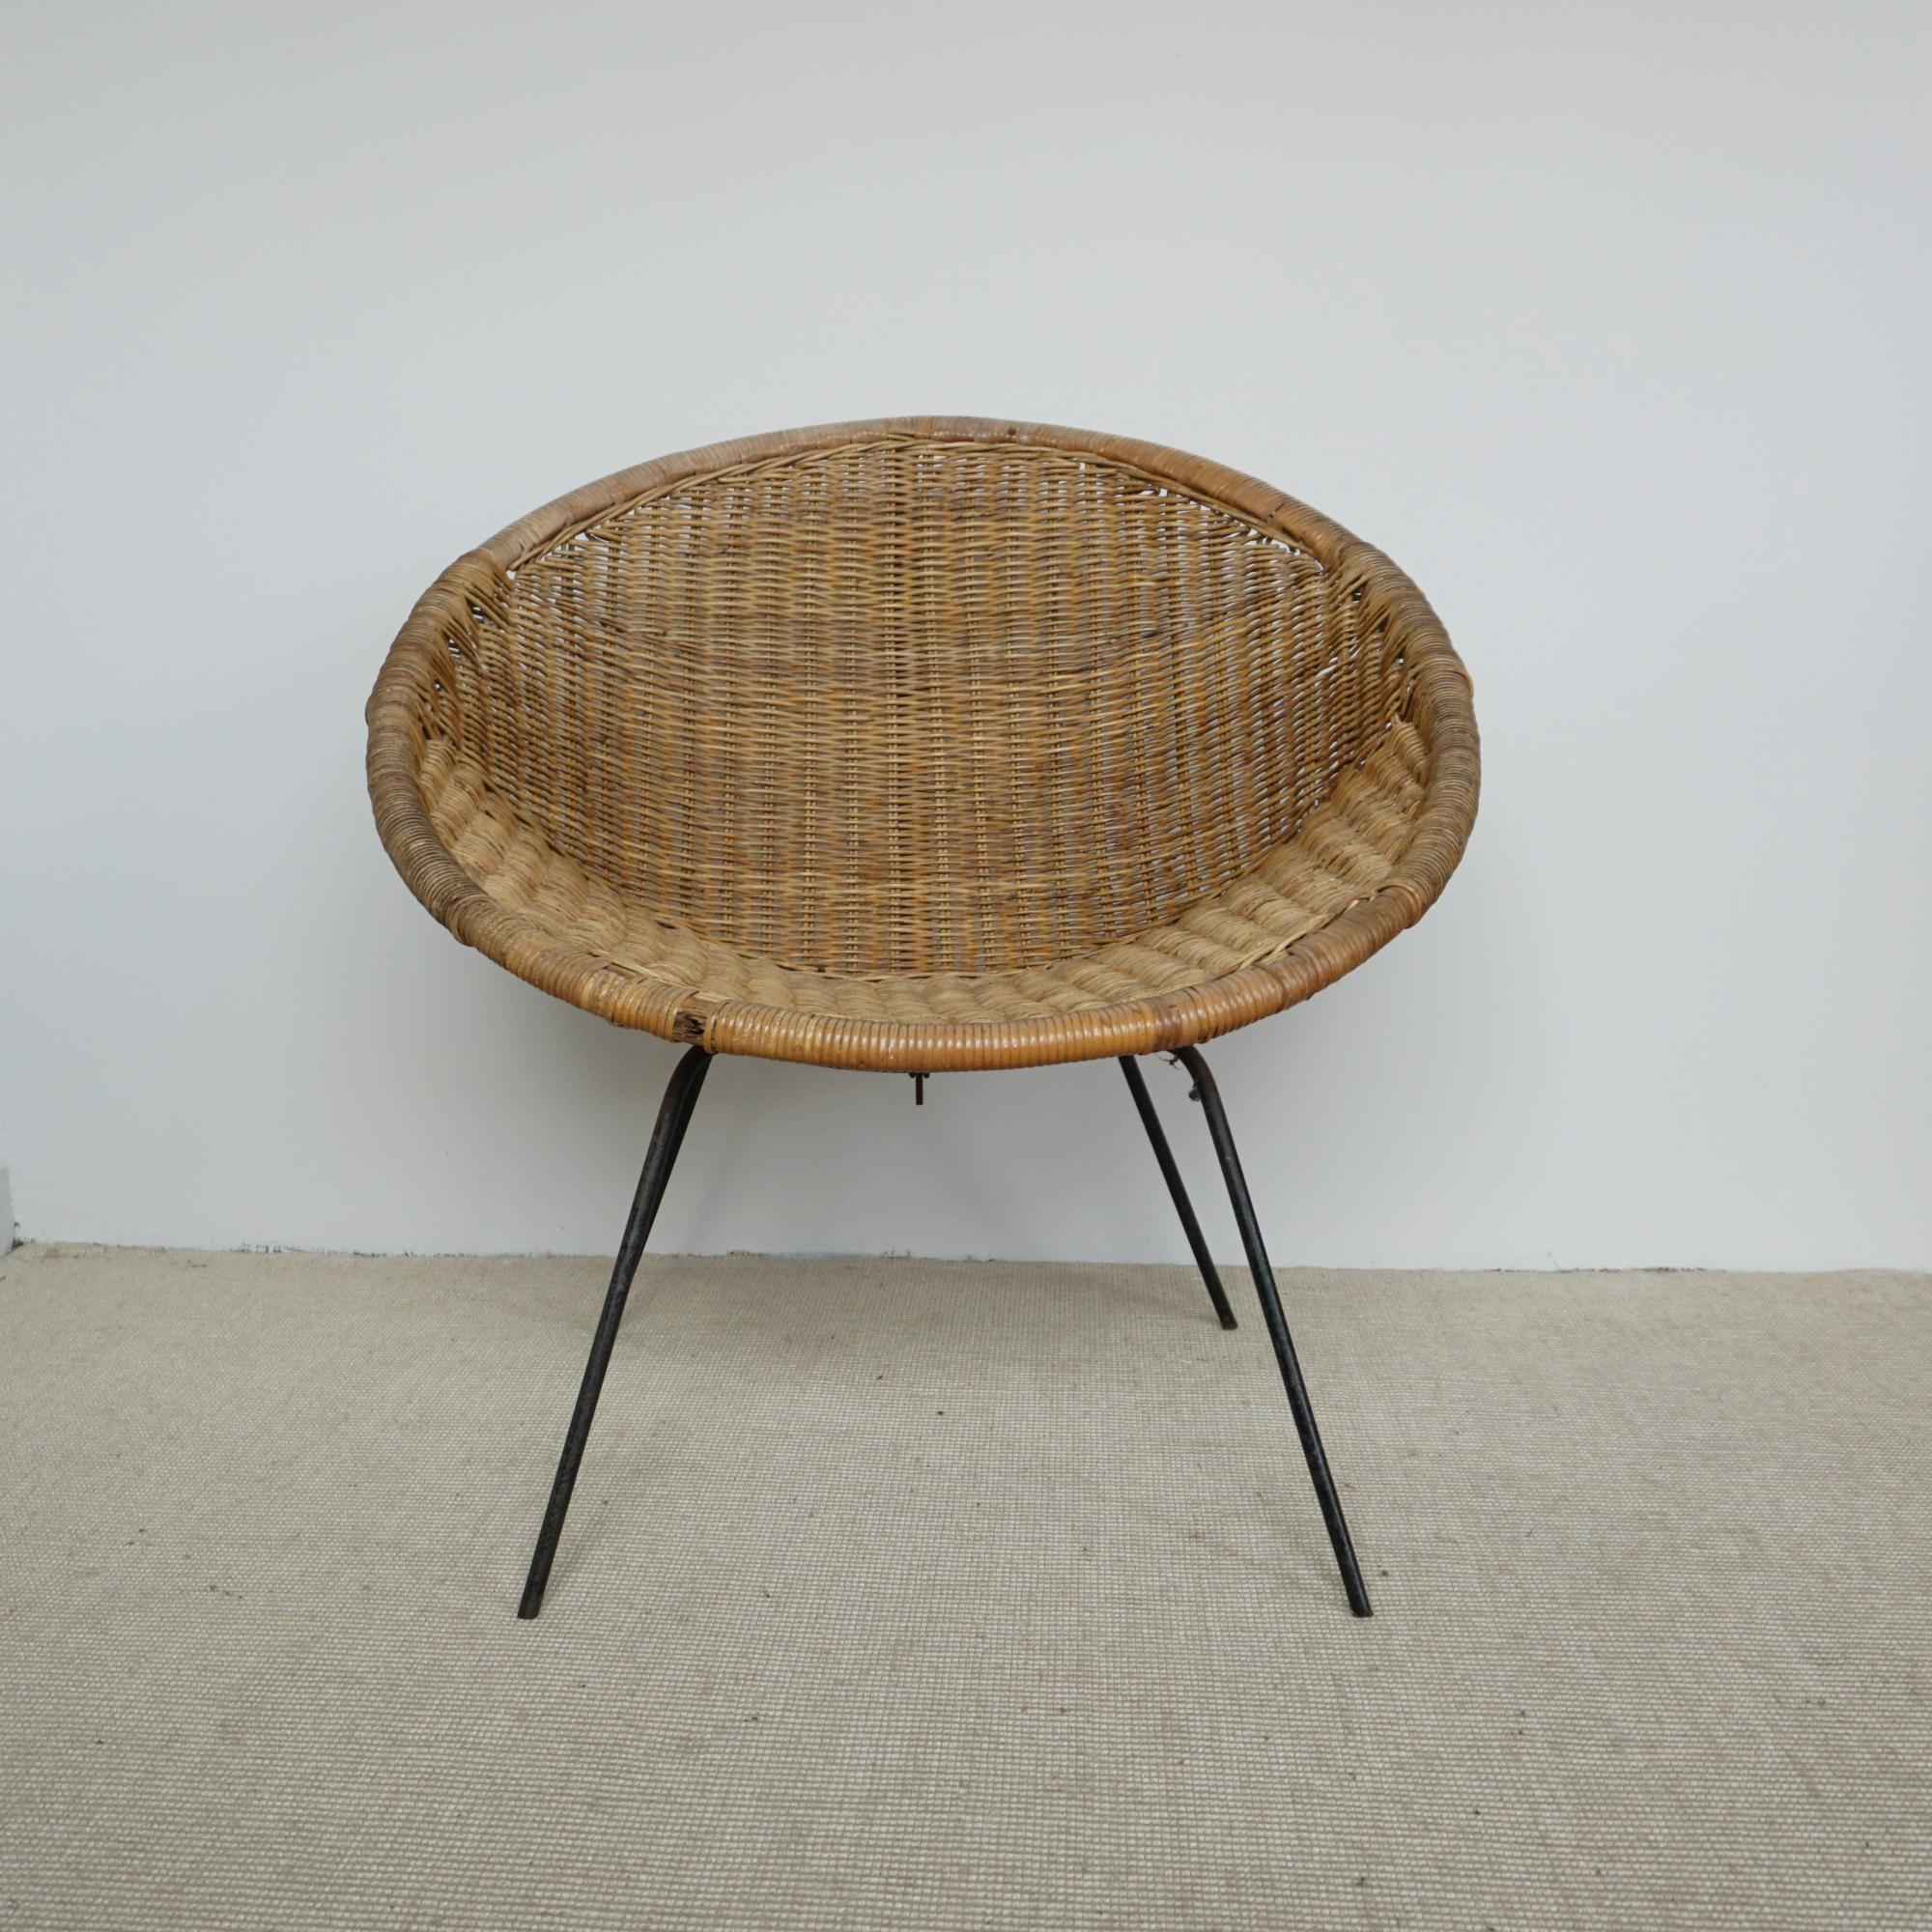 A Wicker and steel armchair from Galerie Madoura, belonging to the great cubist master, Pablo Picasso. Later plaque attached to back. Full provenance available.


